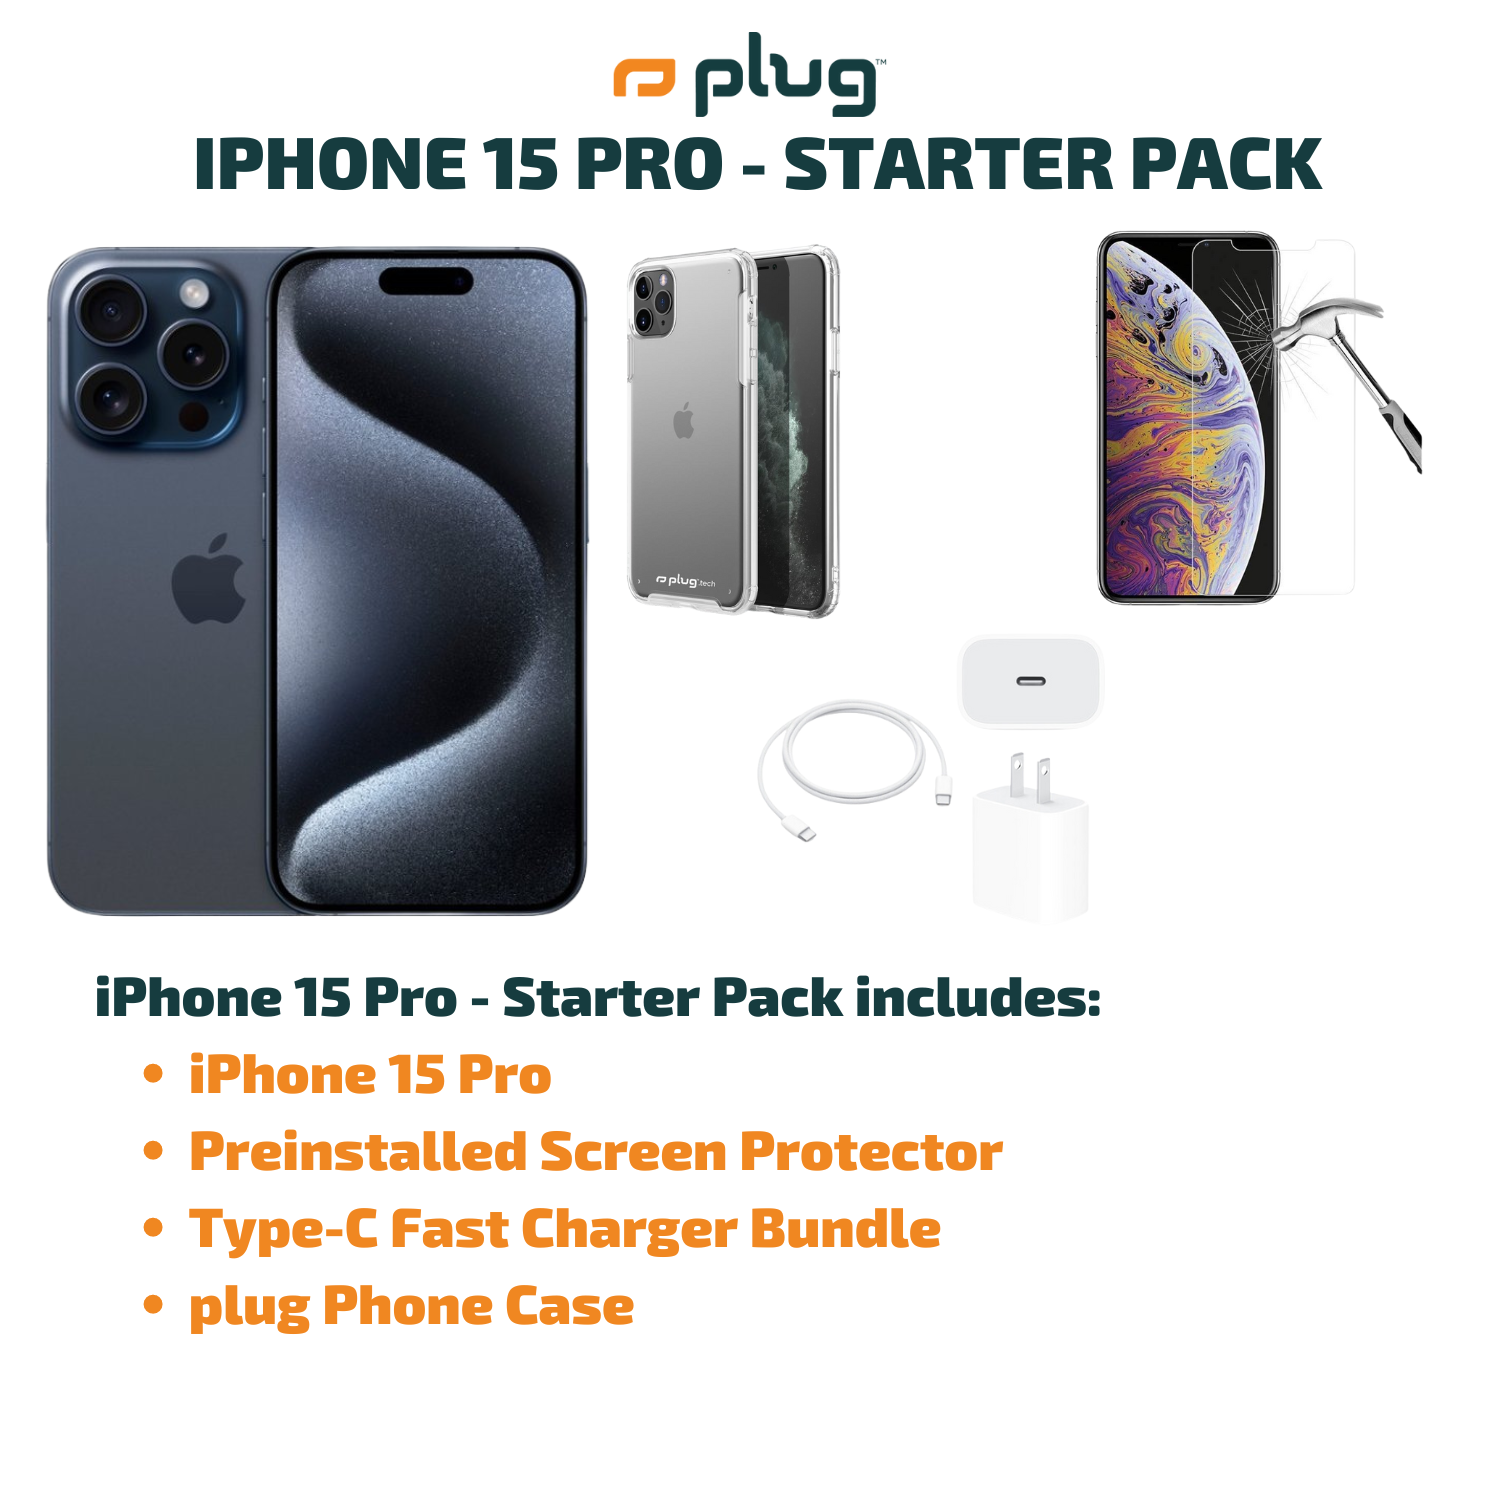 iPhone 15 Pro - Starter Pack